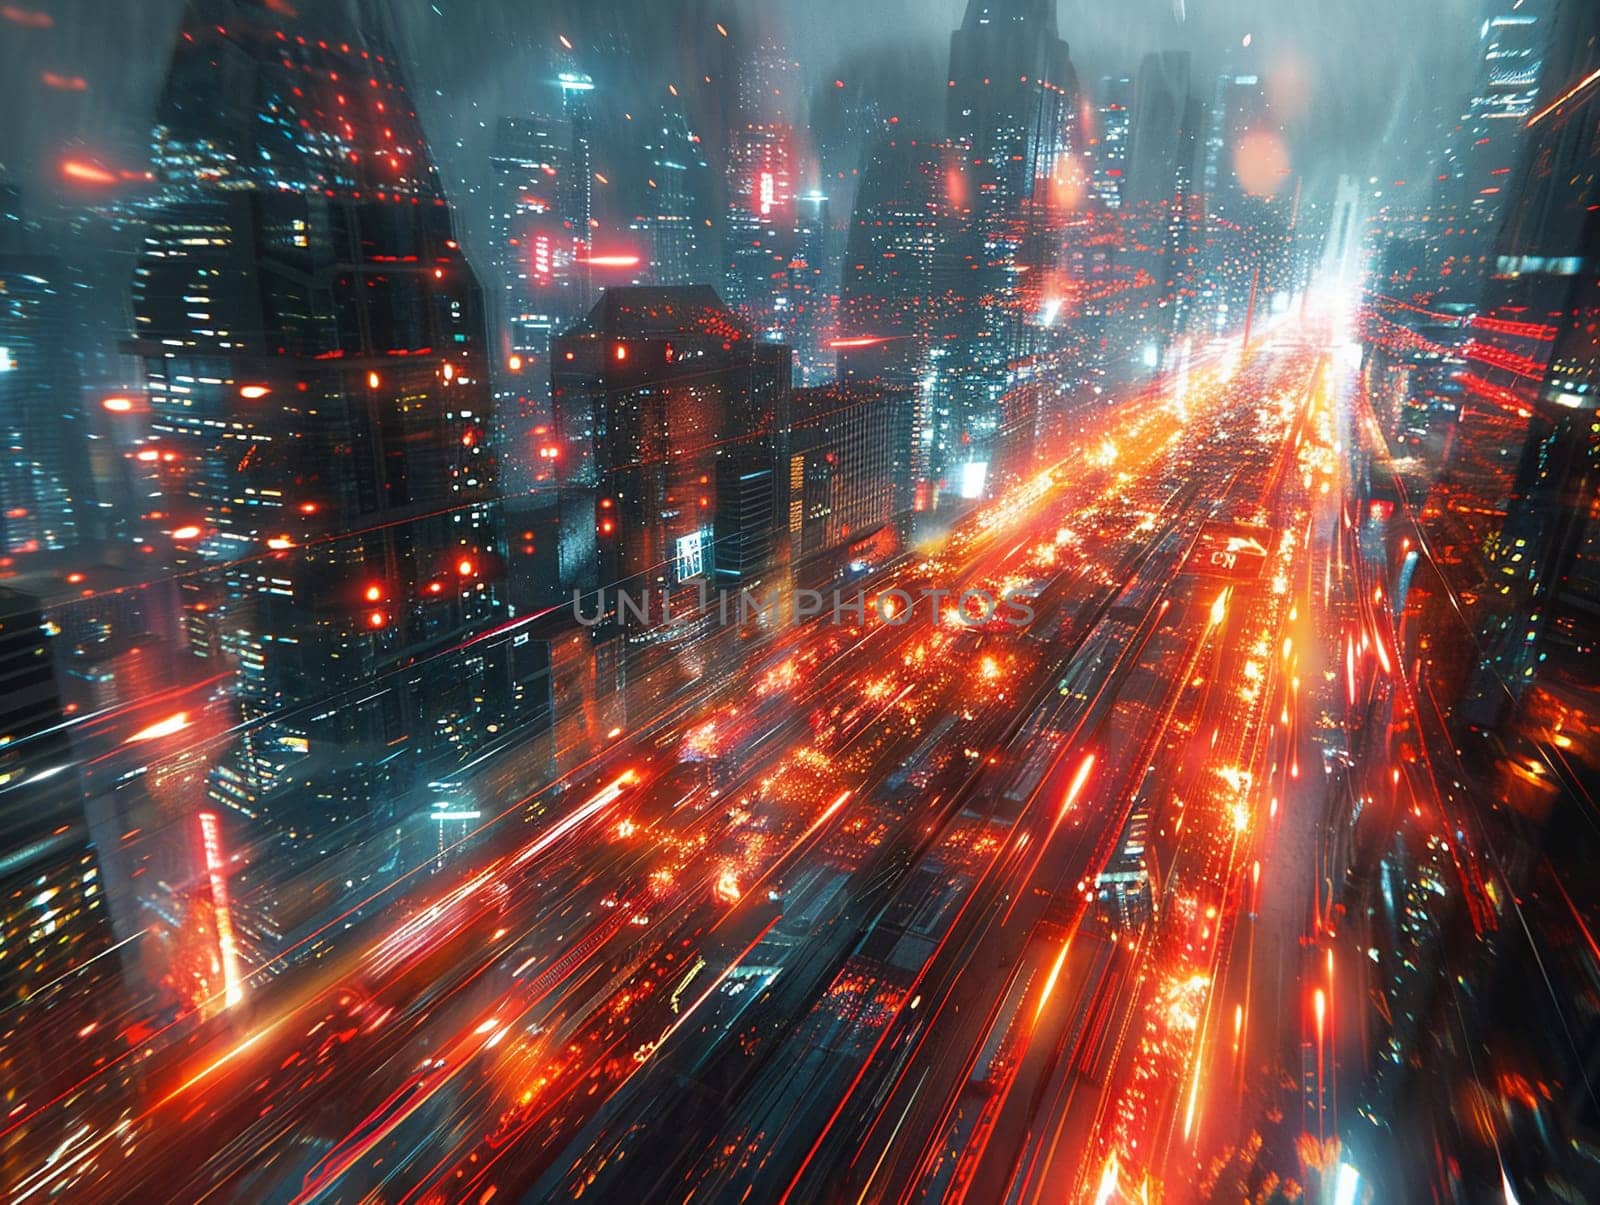 Electricity coursing through a futuristic city, illustration showing vibrant energy flows and technological advancements.